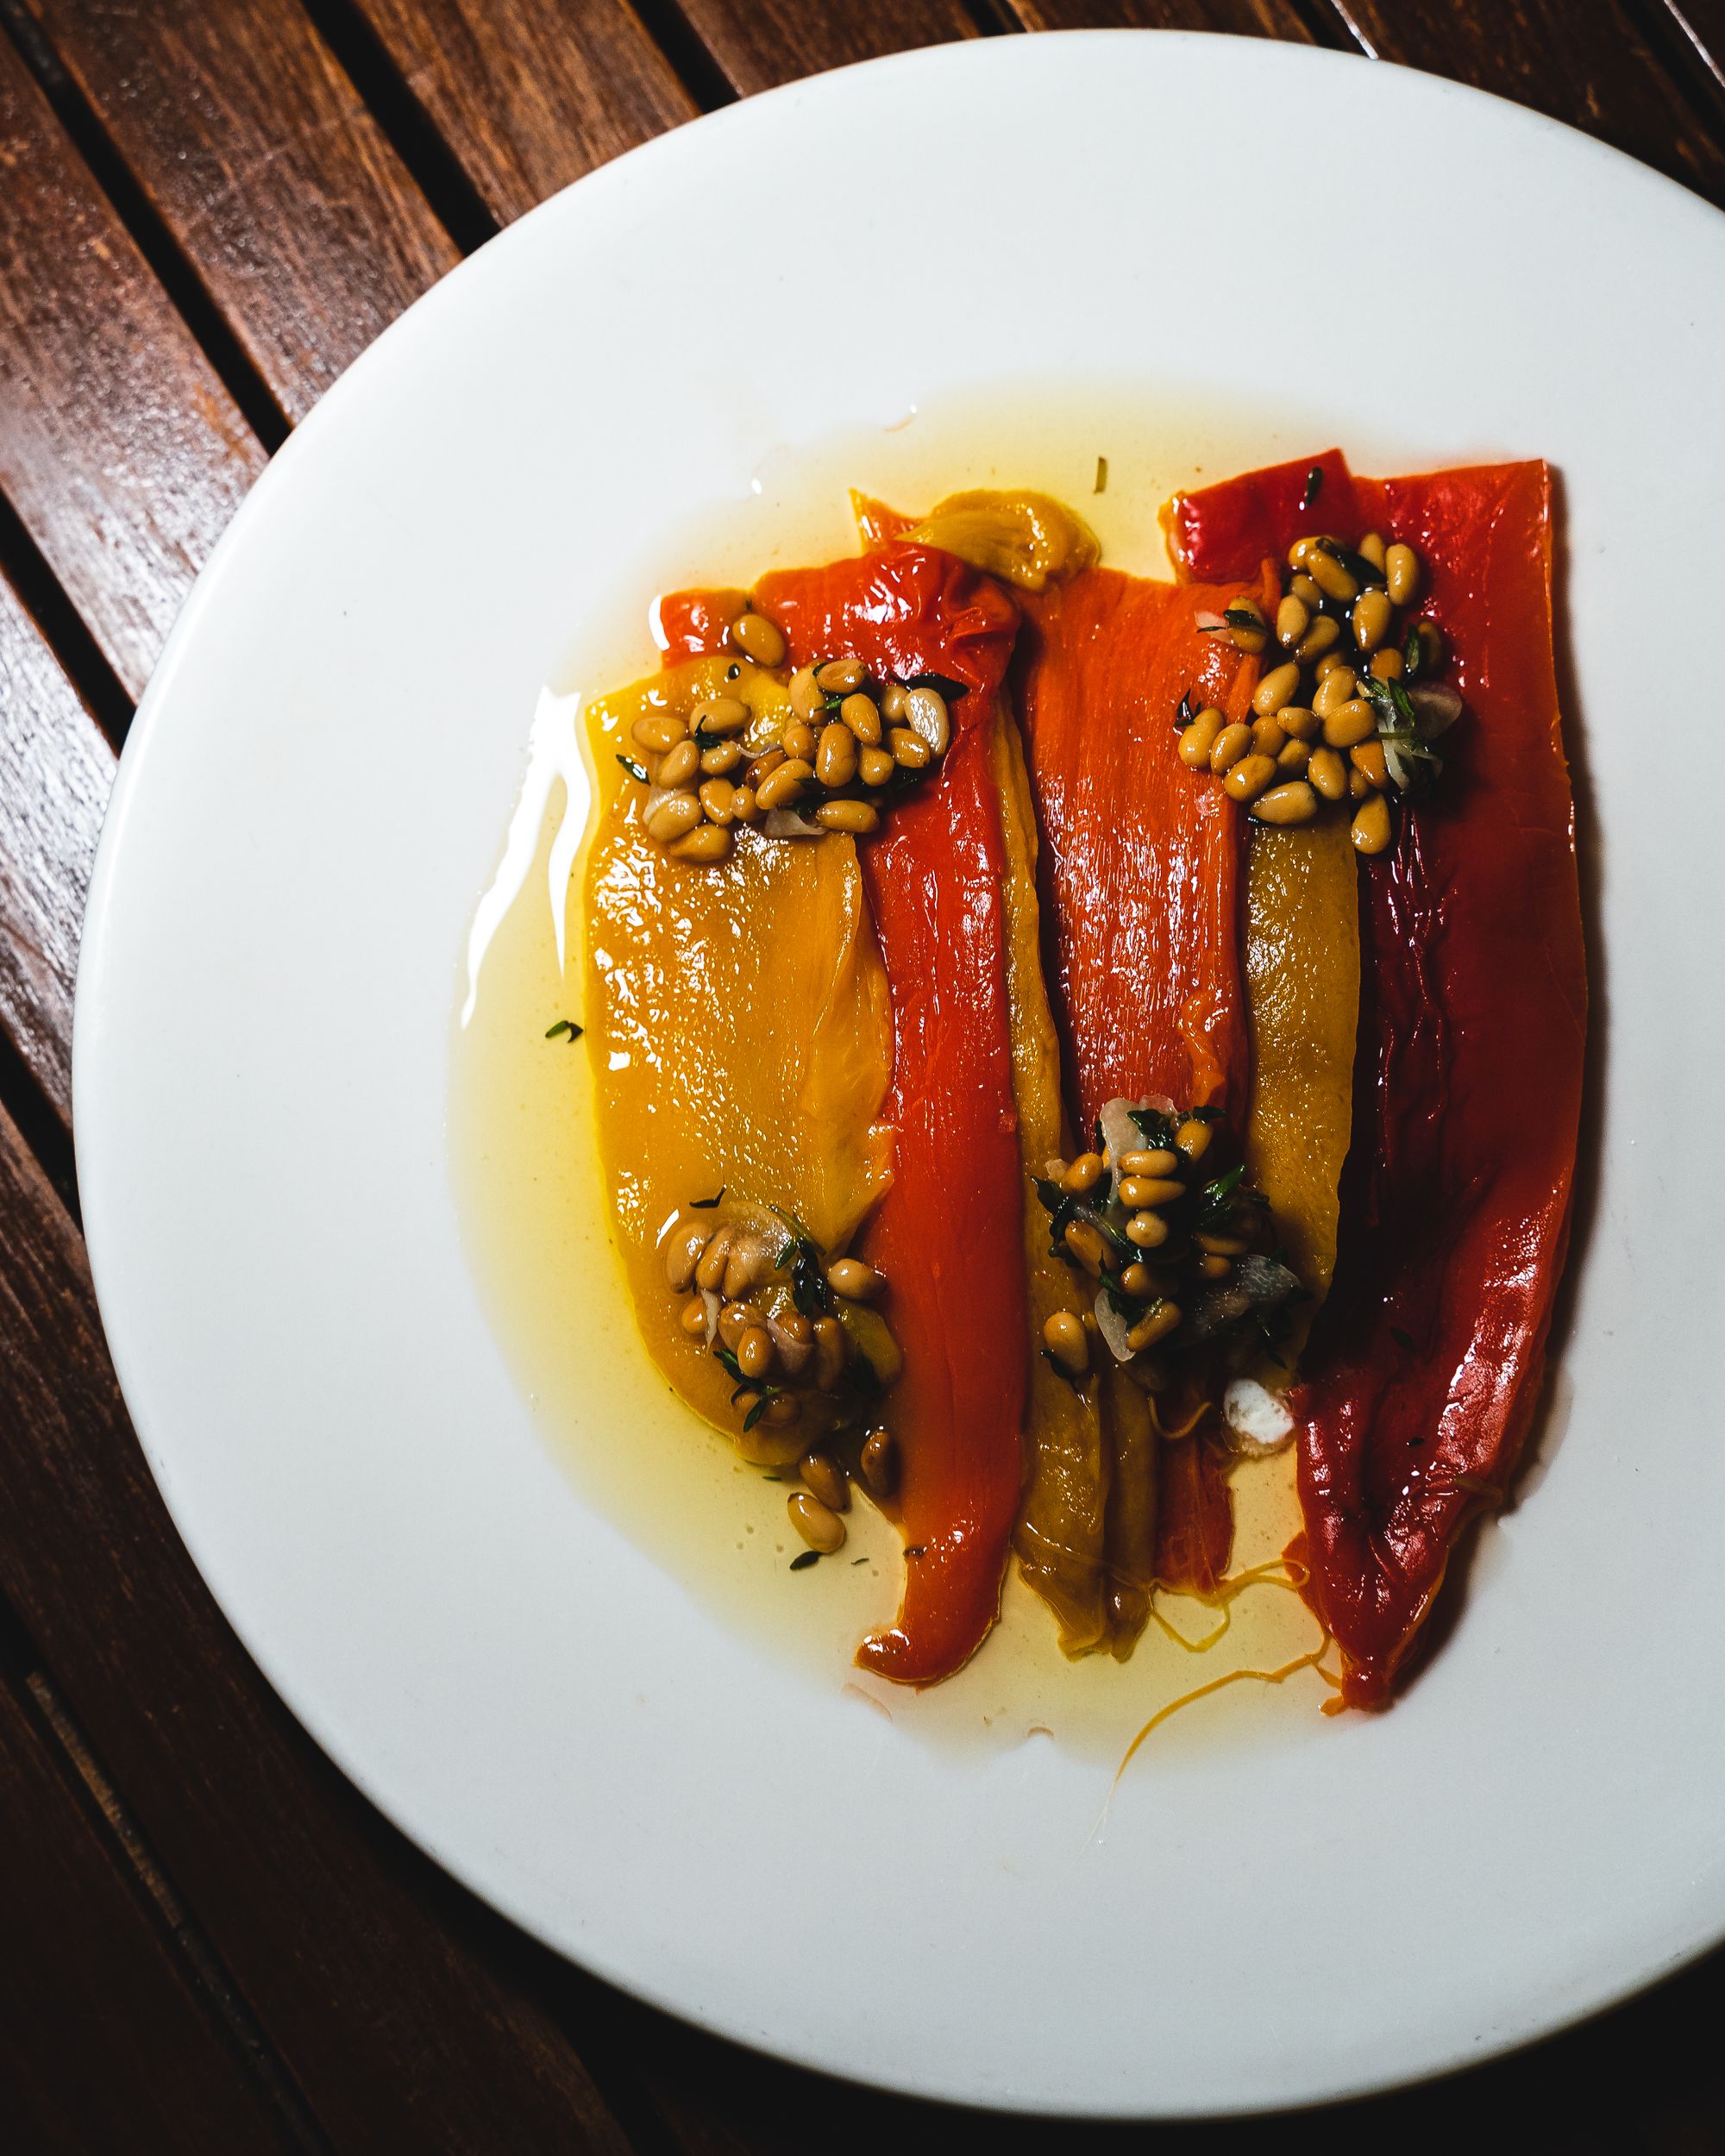 Slices of bell peppers placed on a plate with pine nuts as garnish